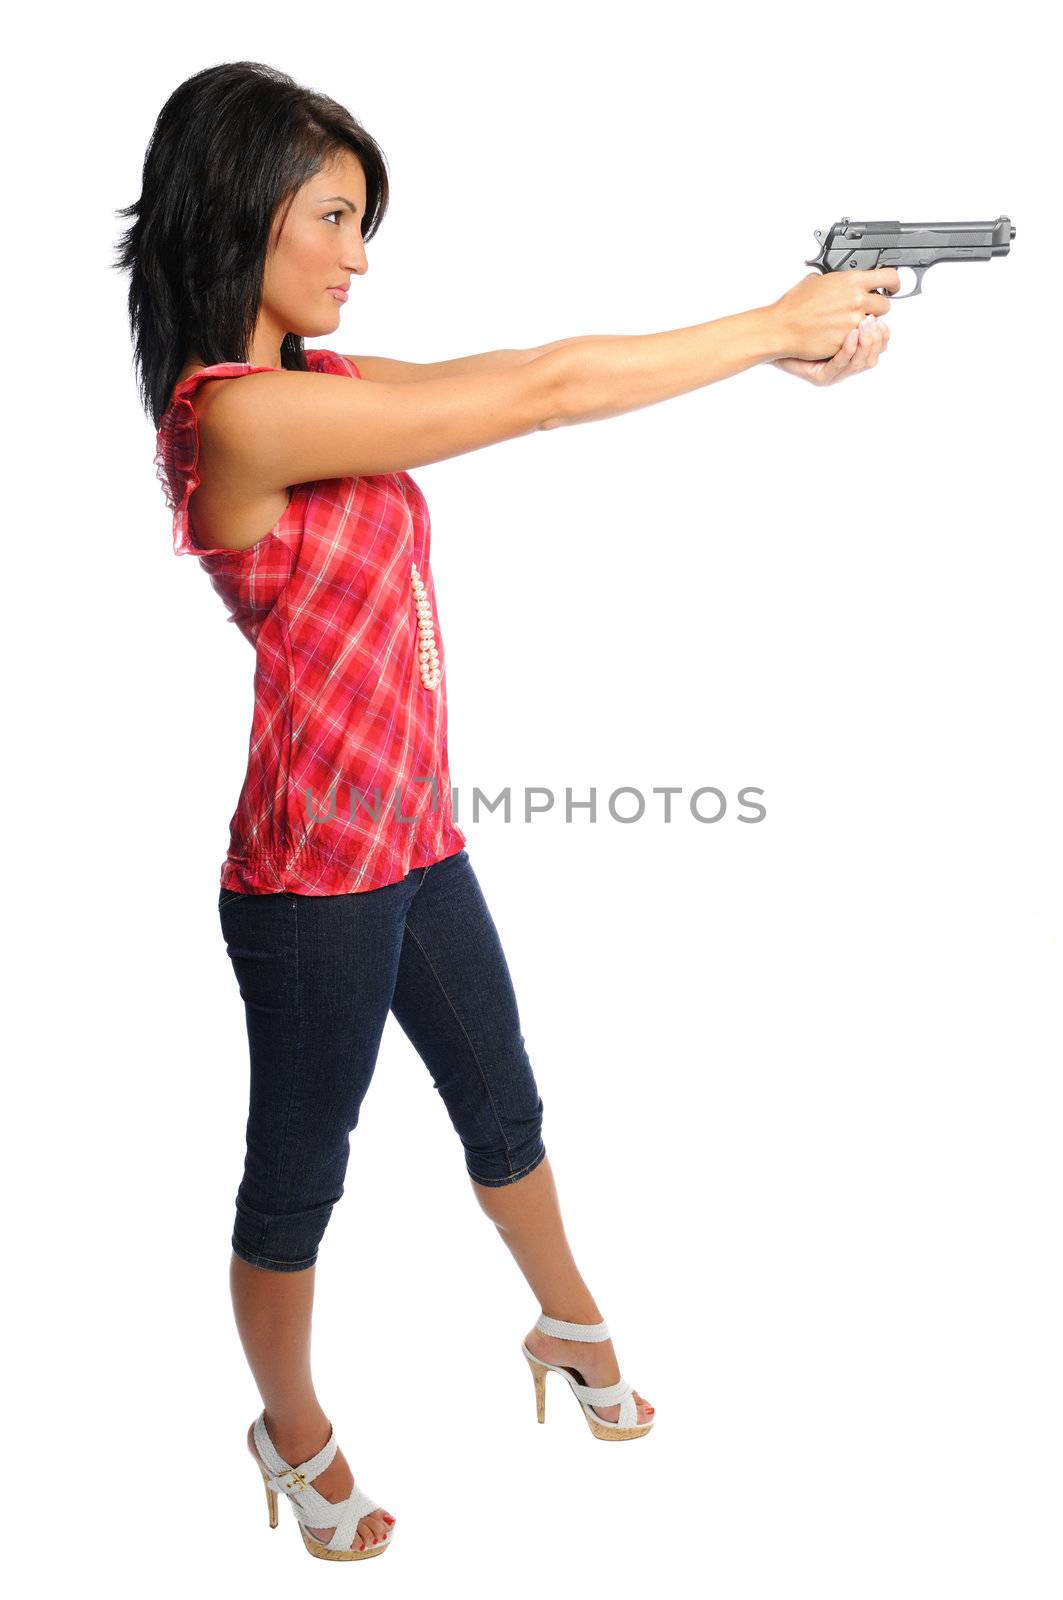 attracive hispanic woman holding a pistol ready to shoot on a white background